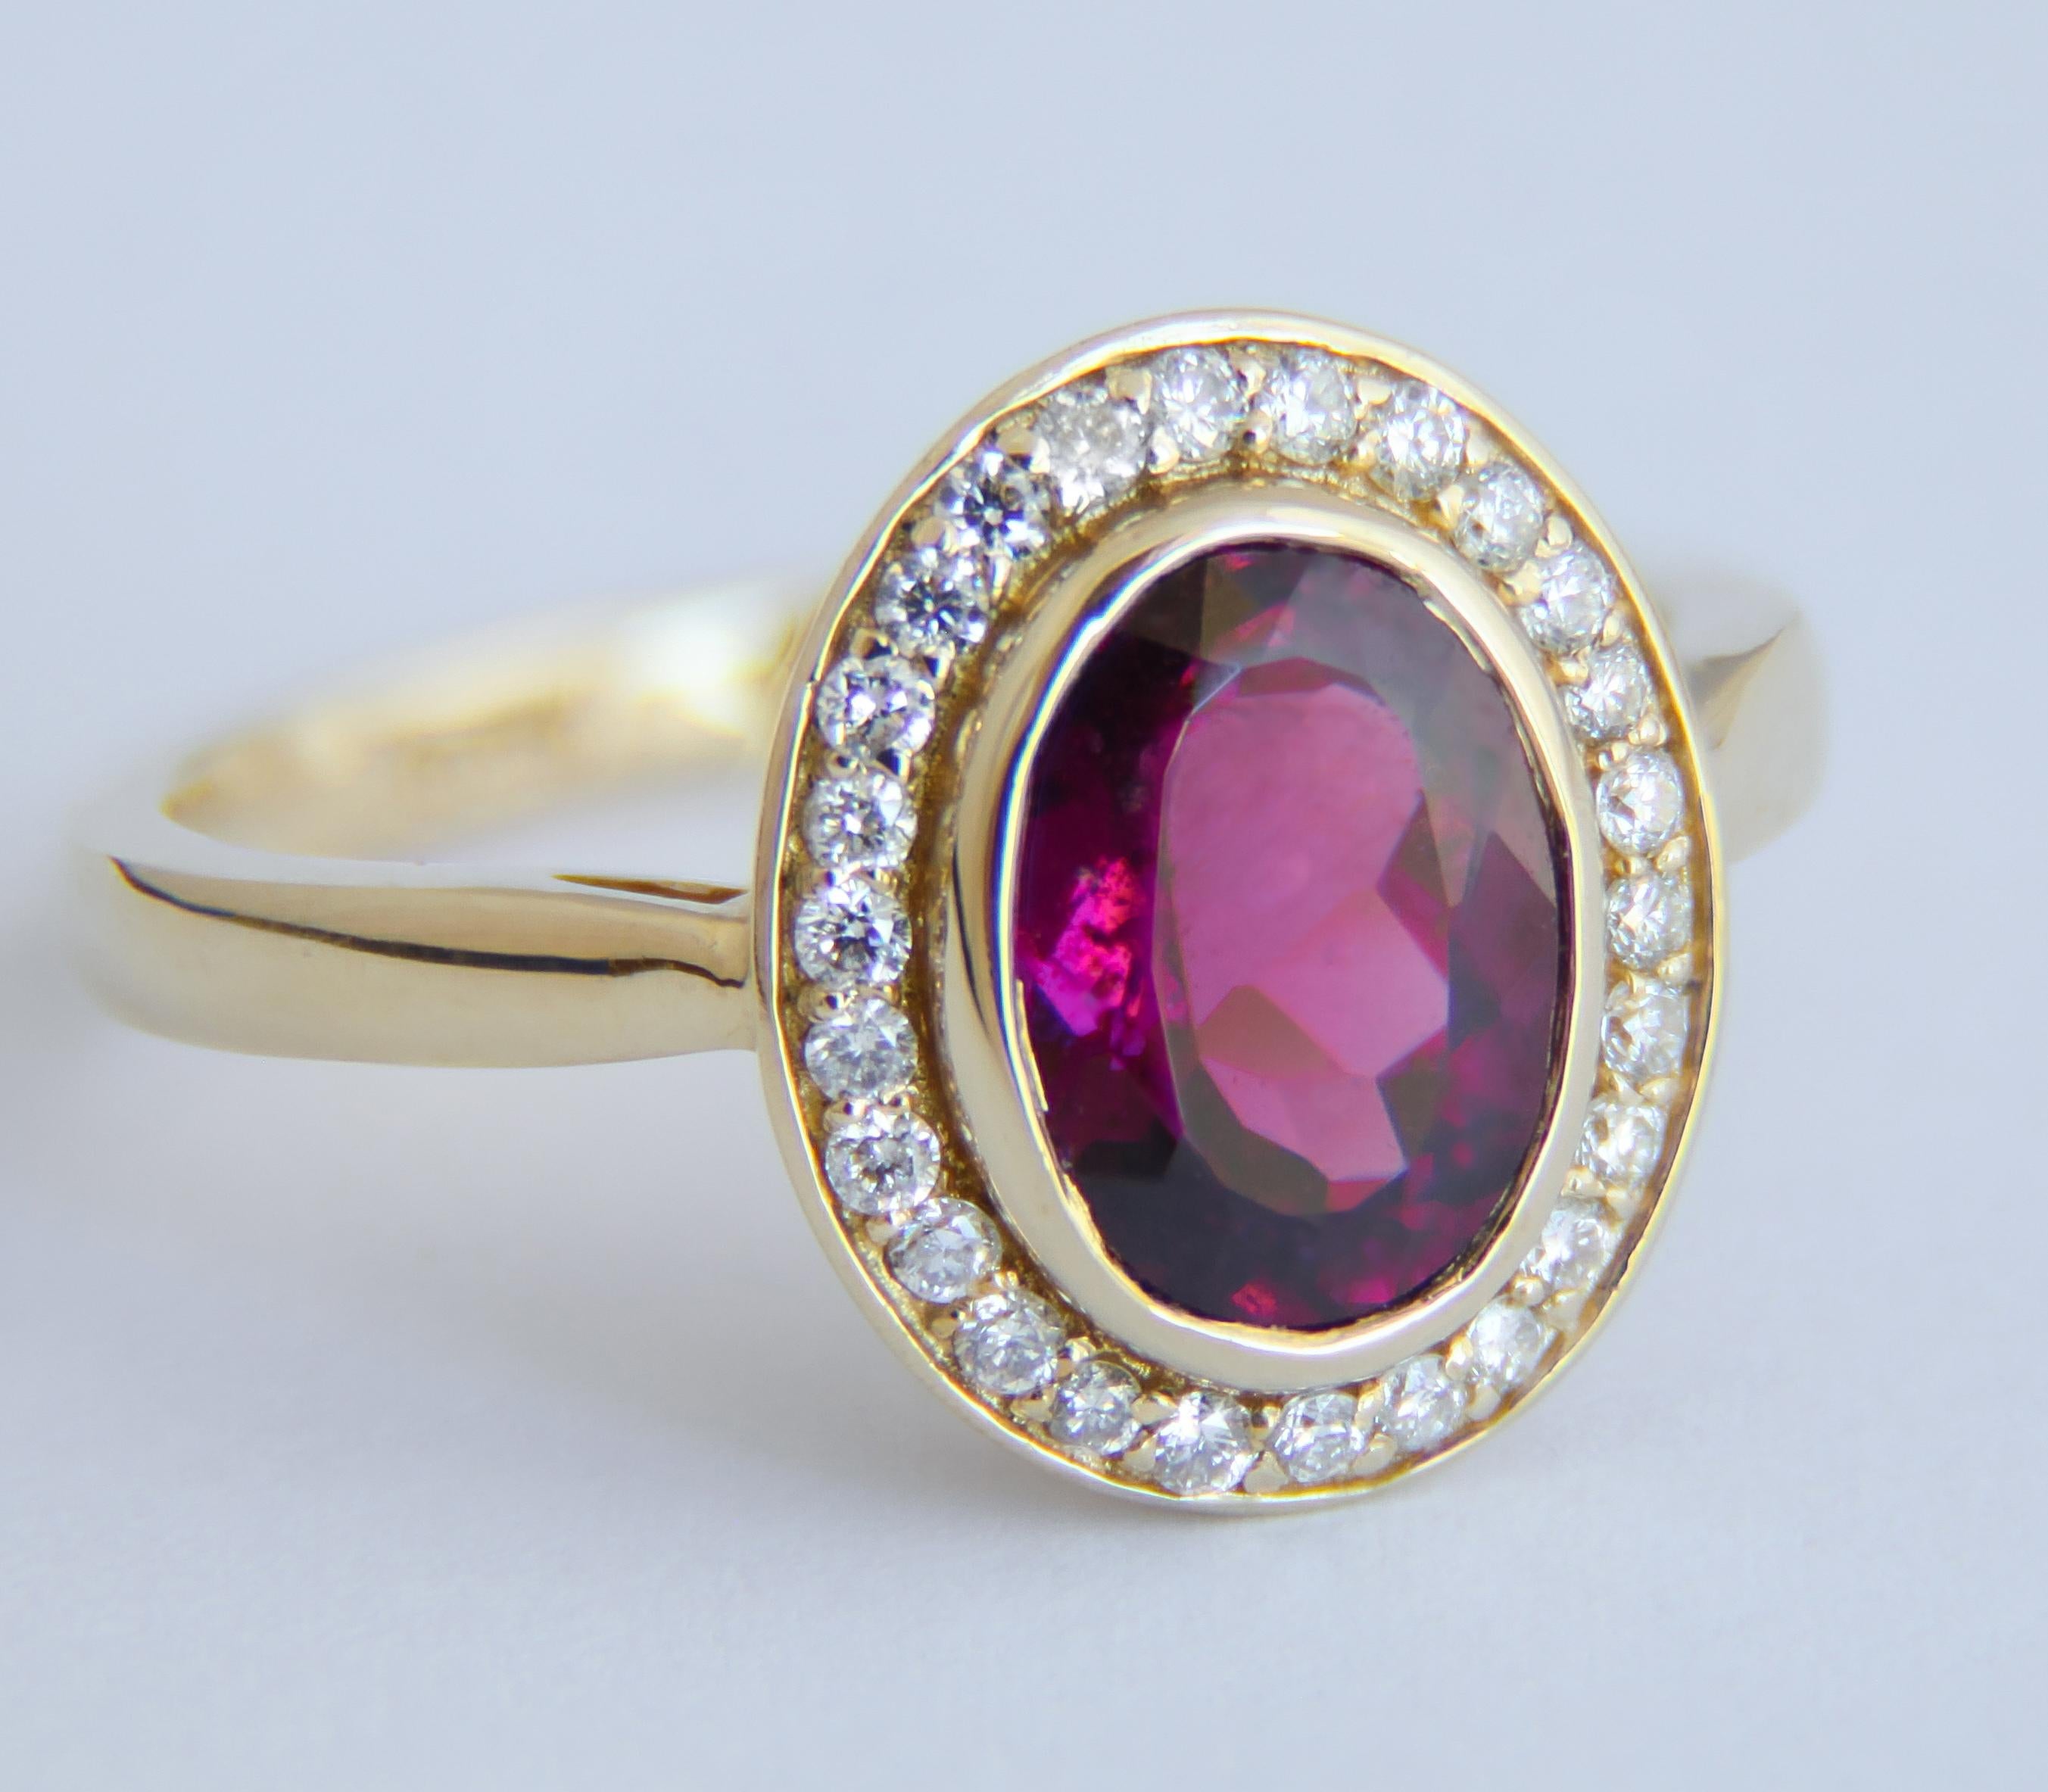 For Sale:  Garnet and diamonds 14k gold ring. 7